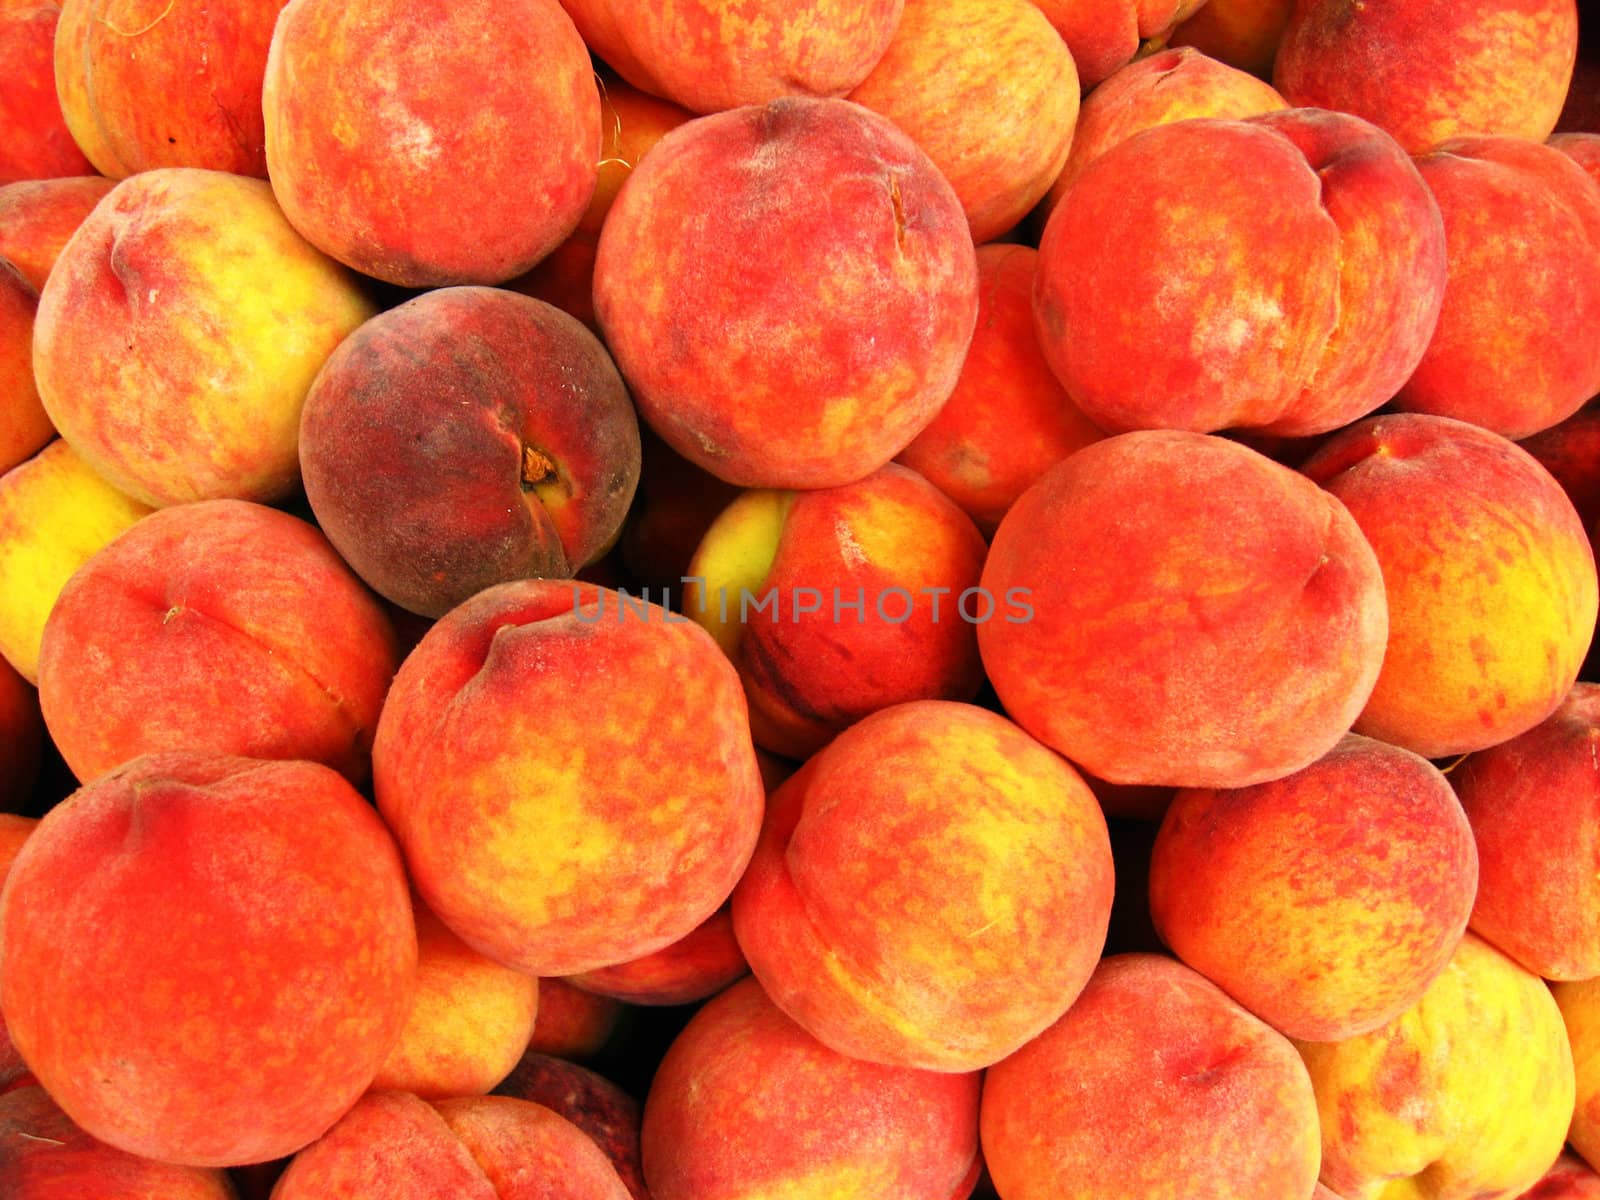 Many bright ripe and tasty peaches by alexmak